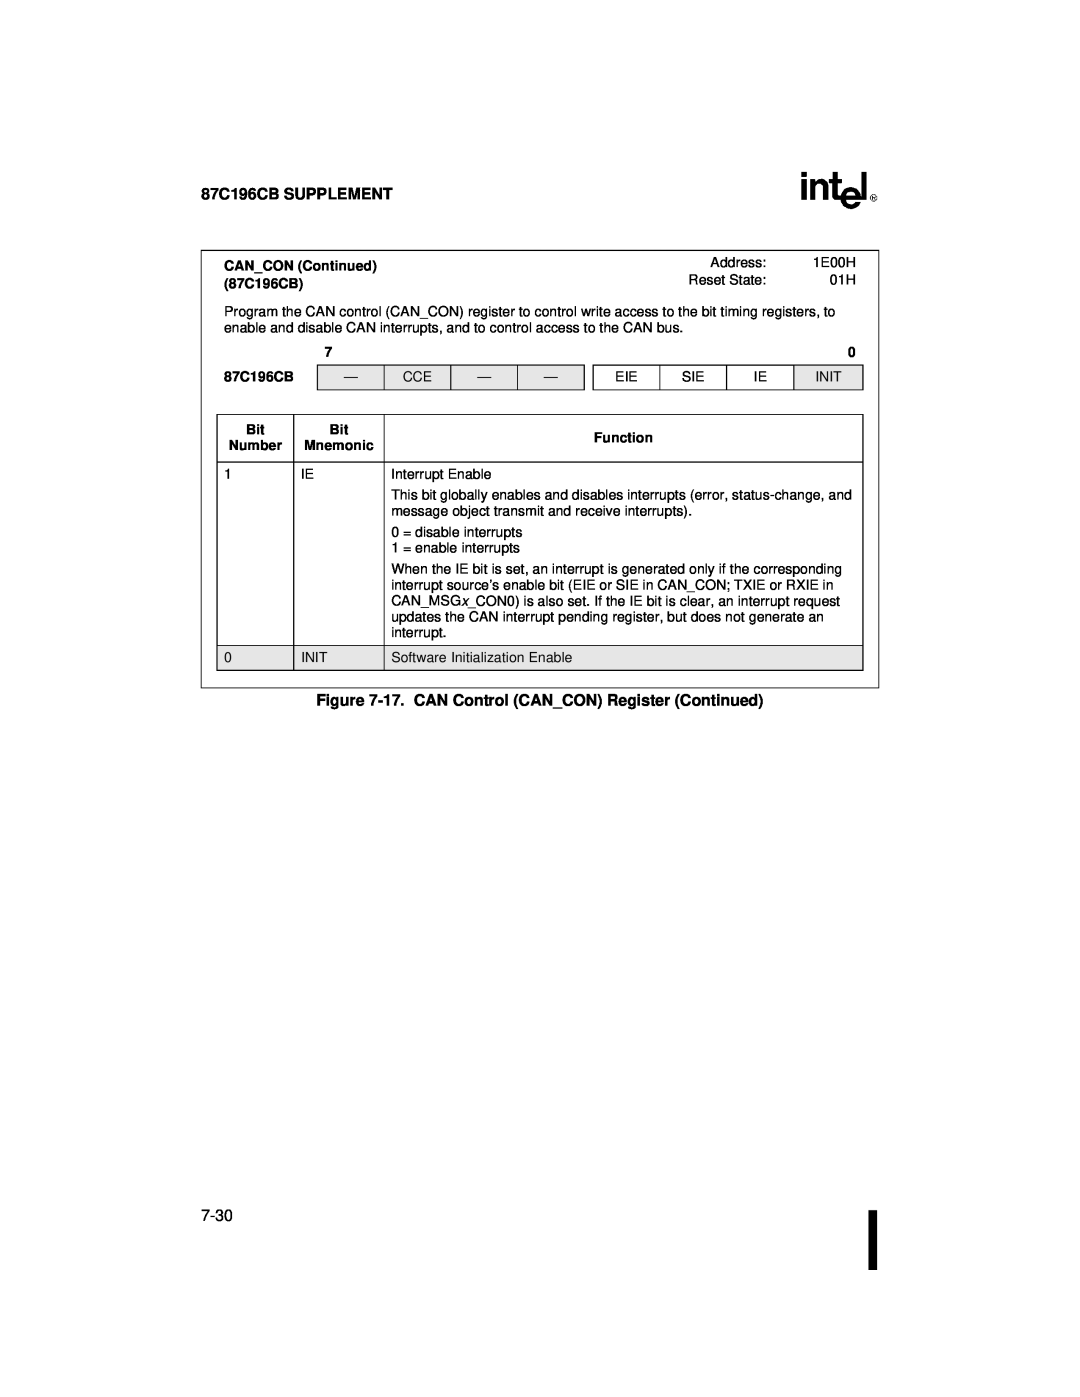 Intel 8XC196NT user manual 87C196CB SUPPLEMENT, 17. CAN Control CANCON Register Continued, CANCON Continued, Function 